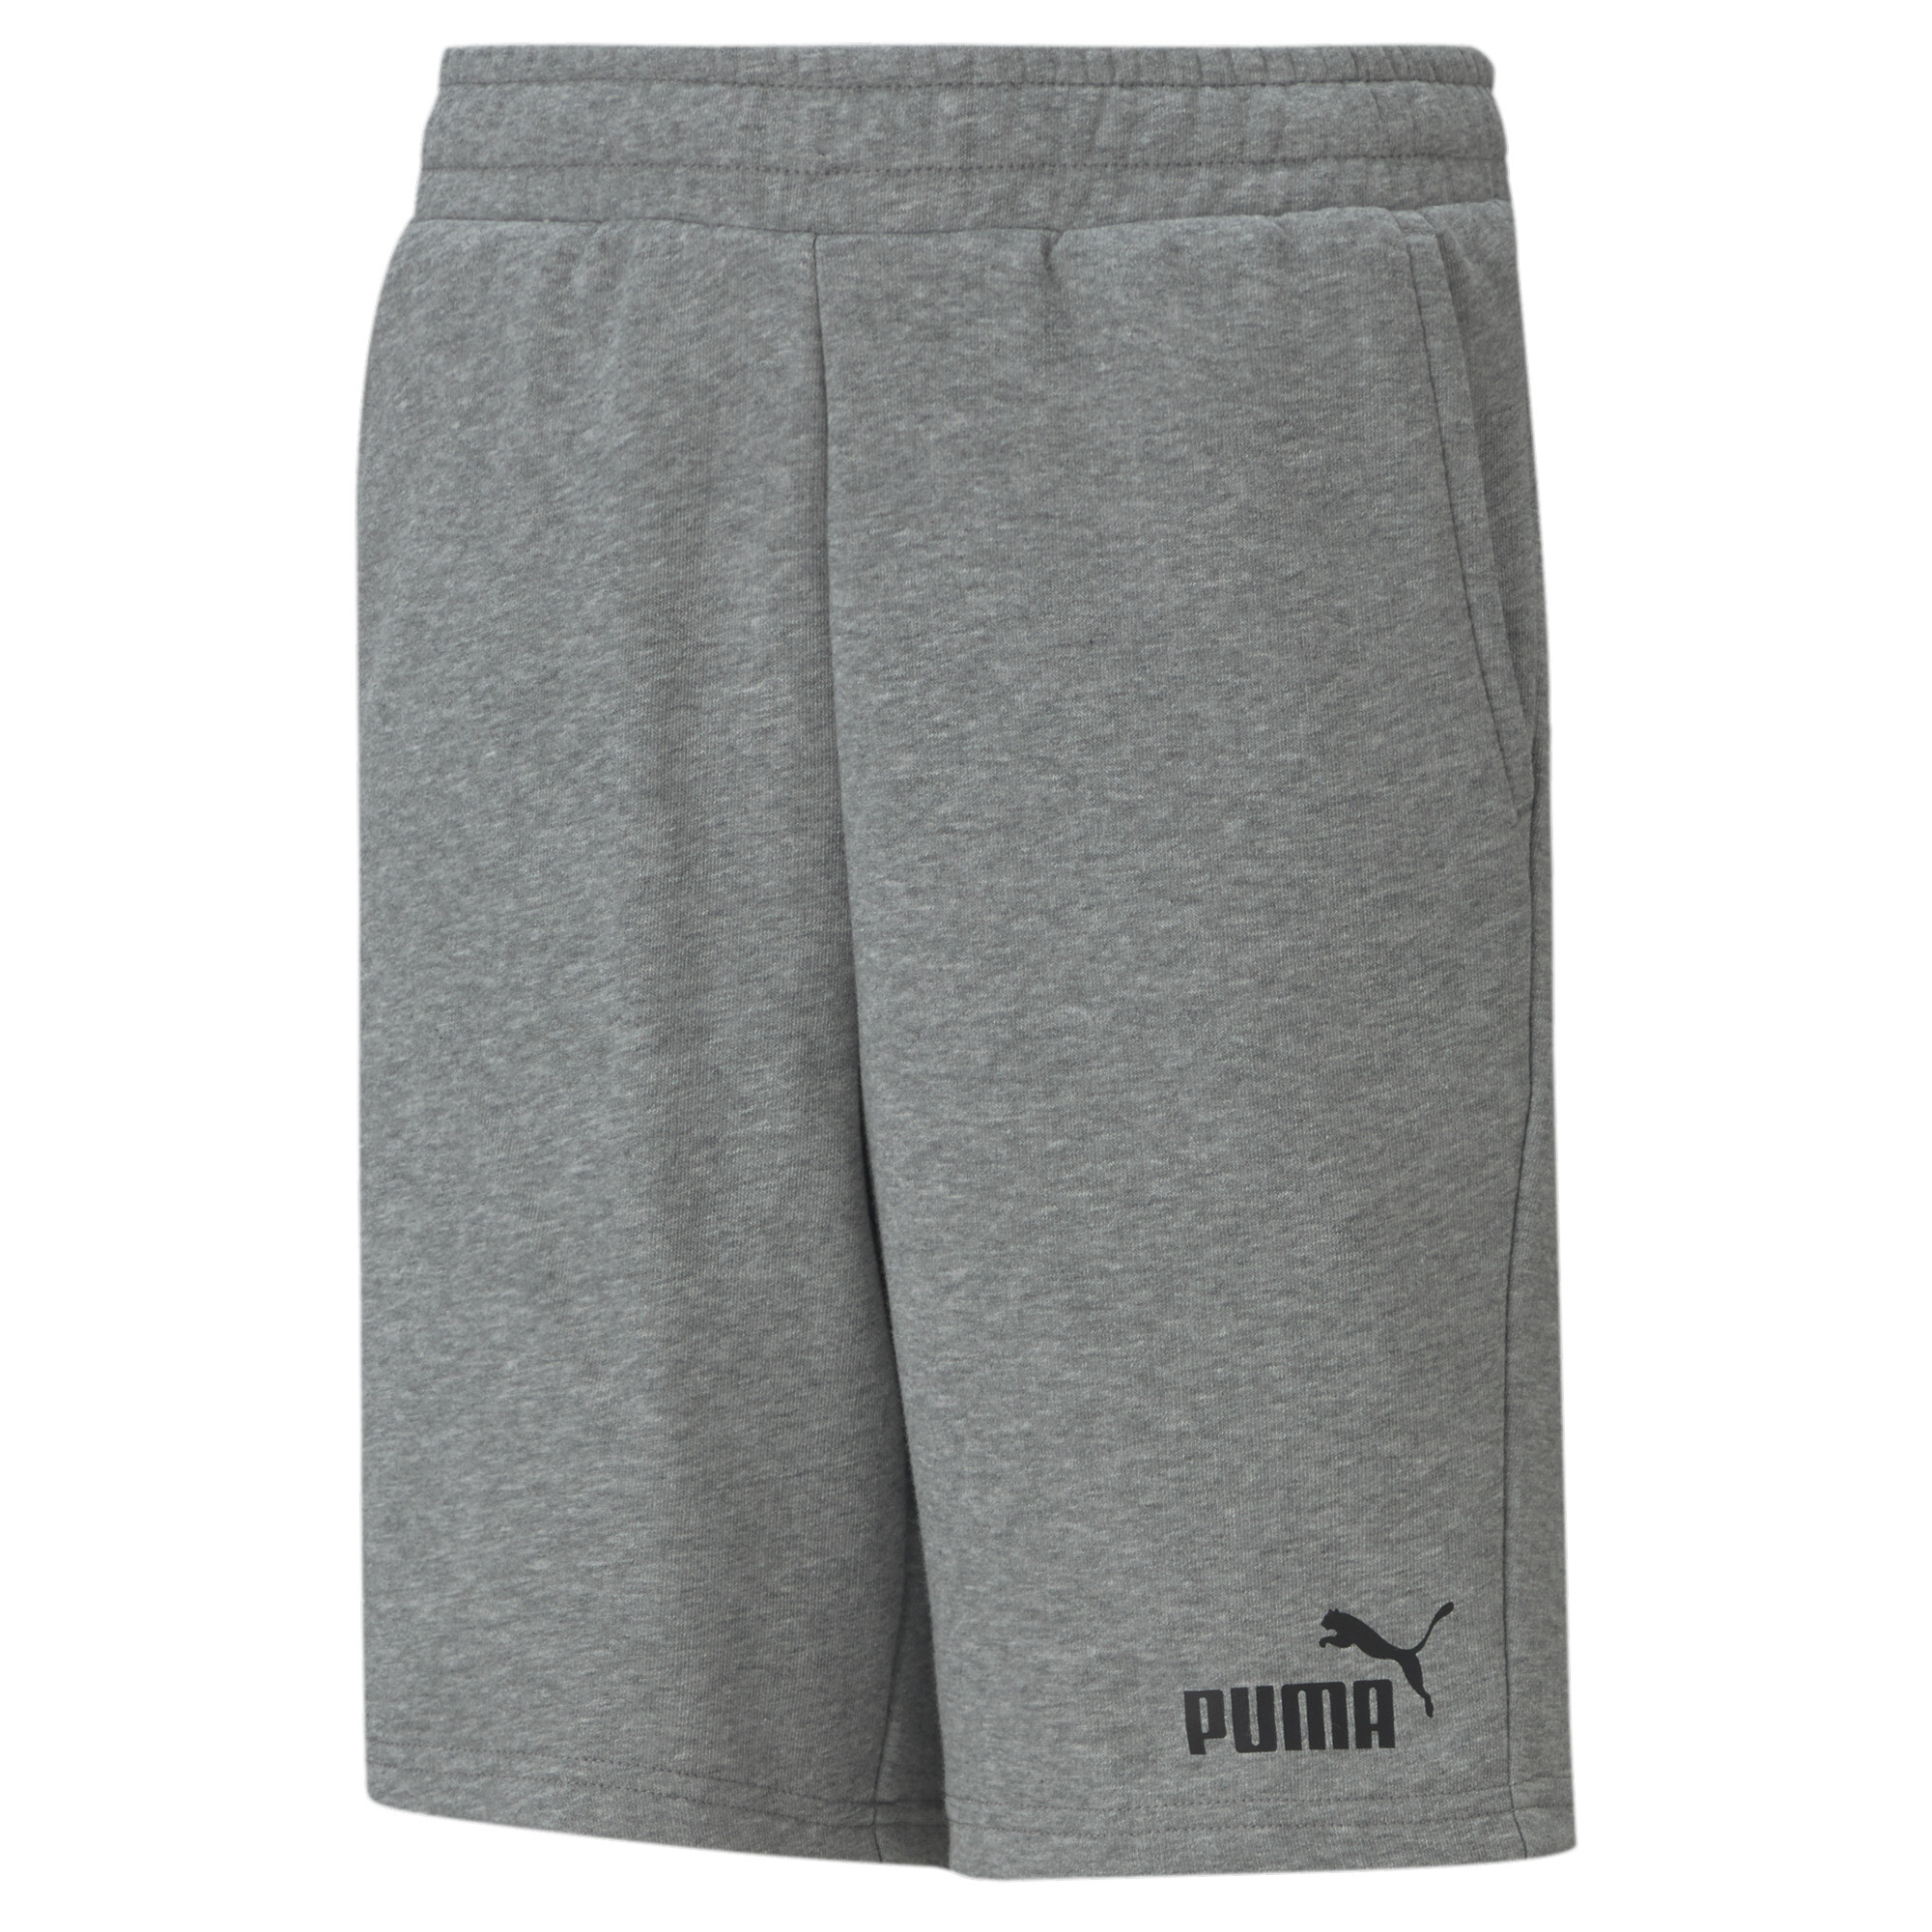 PUMA Essentials Sweat Shorts In Heather, Size 3-4 Youth